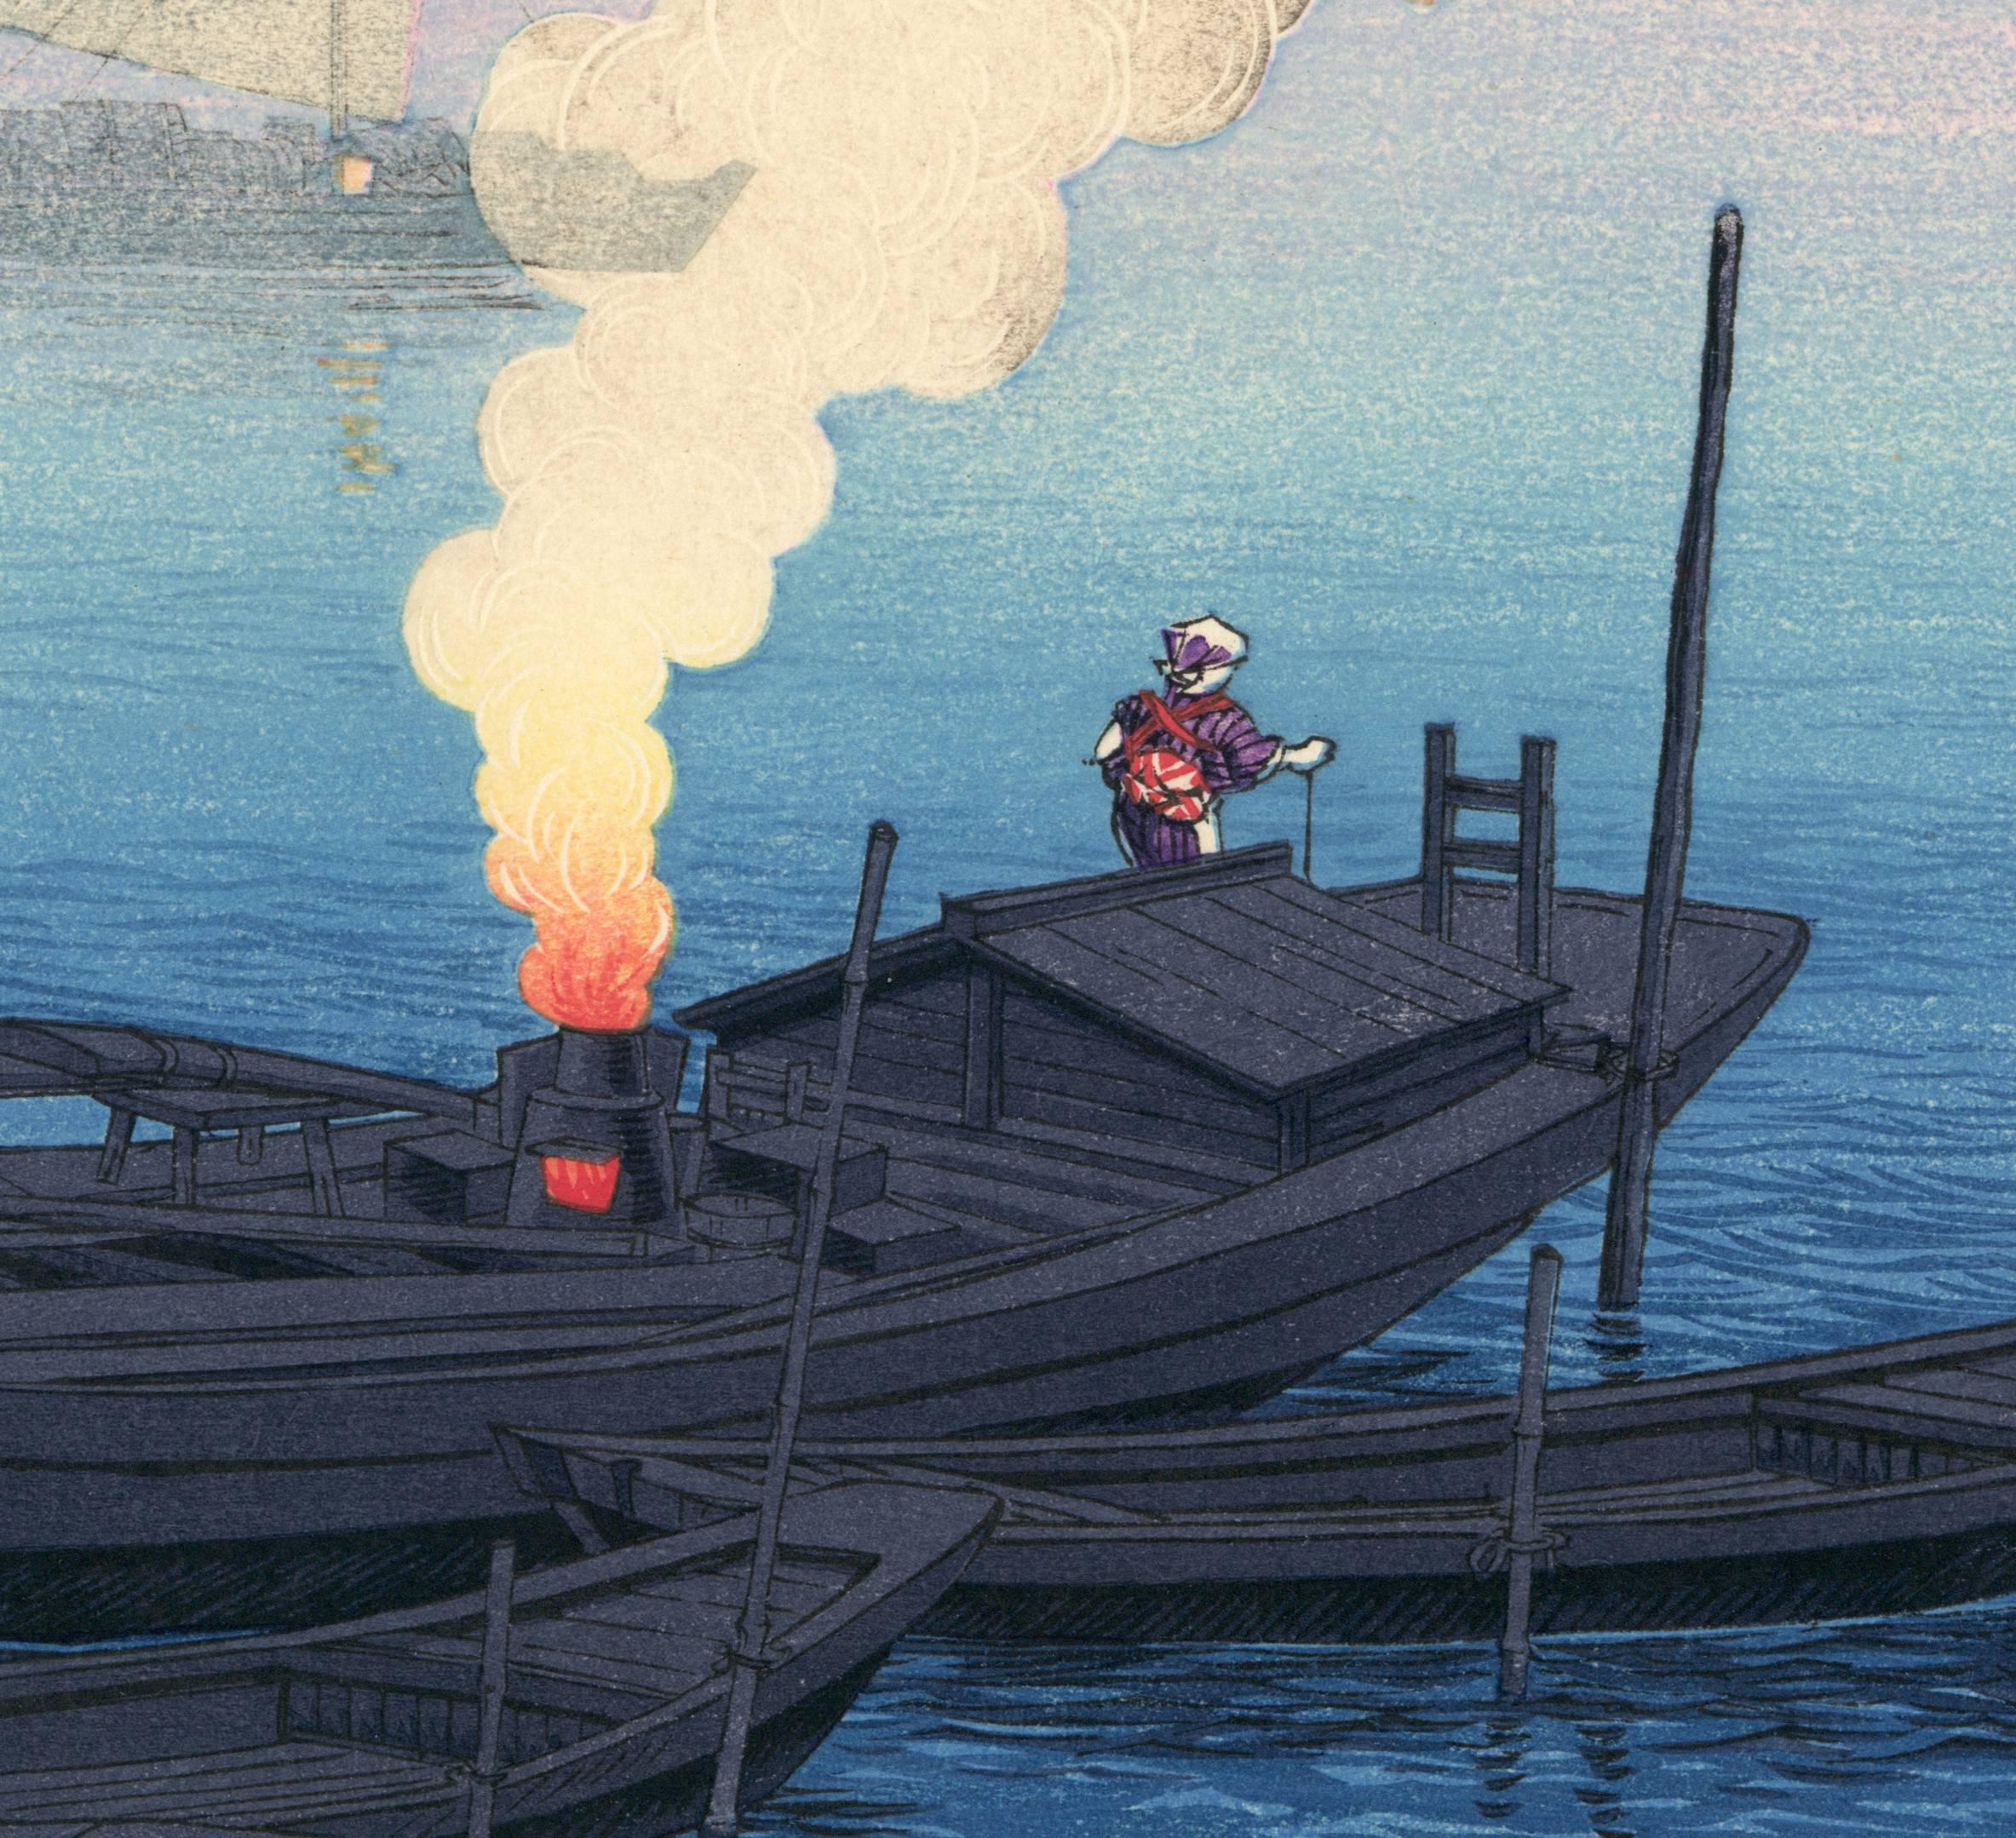 Original Japanese color woodblock print. A woman walks towards the bow of her boat, which rests against narrow pilings. A red-hot fire has been made in the middle of the craft, and the smoke billows up in embossed plumes. The background shows the